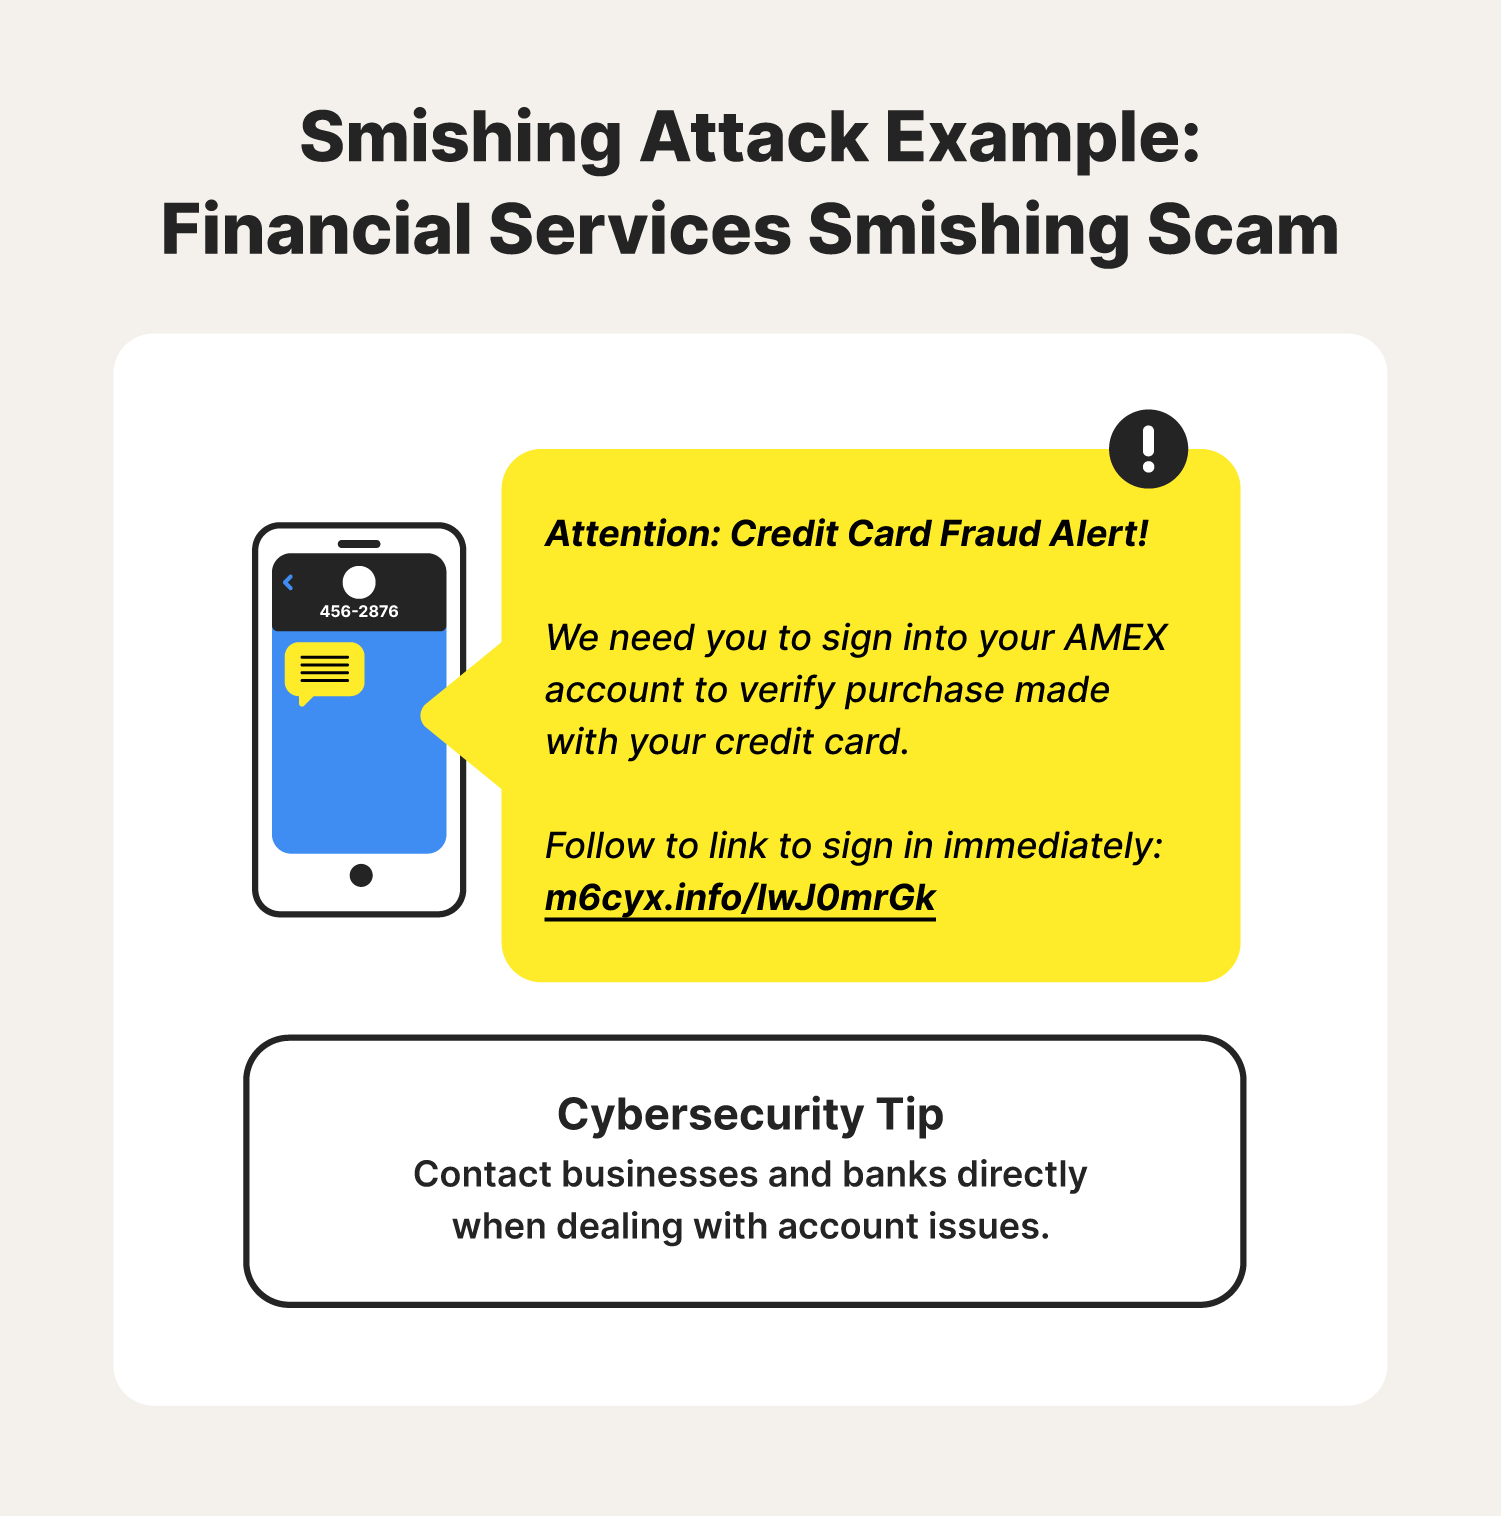 An illustration accompanies an example of a financial services smishing scam paired with a smishing attack protection tip.